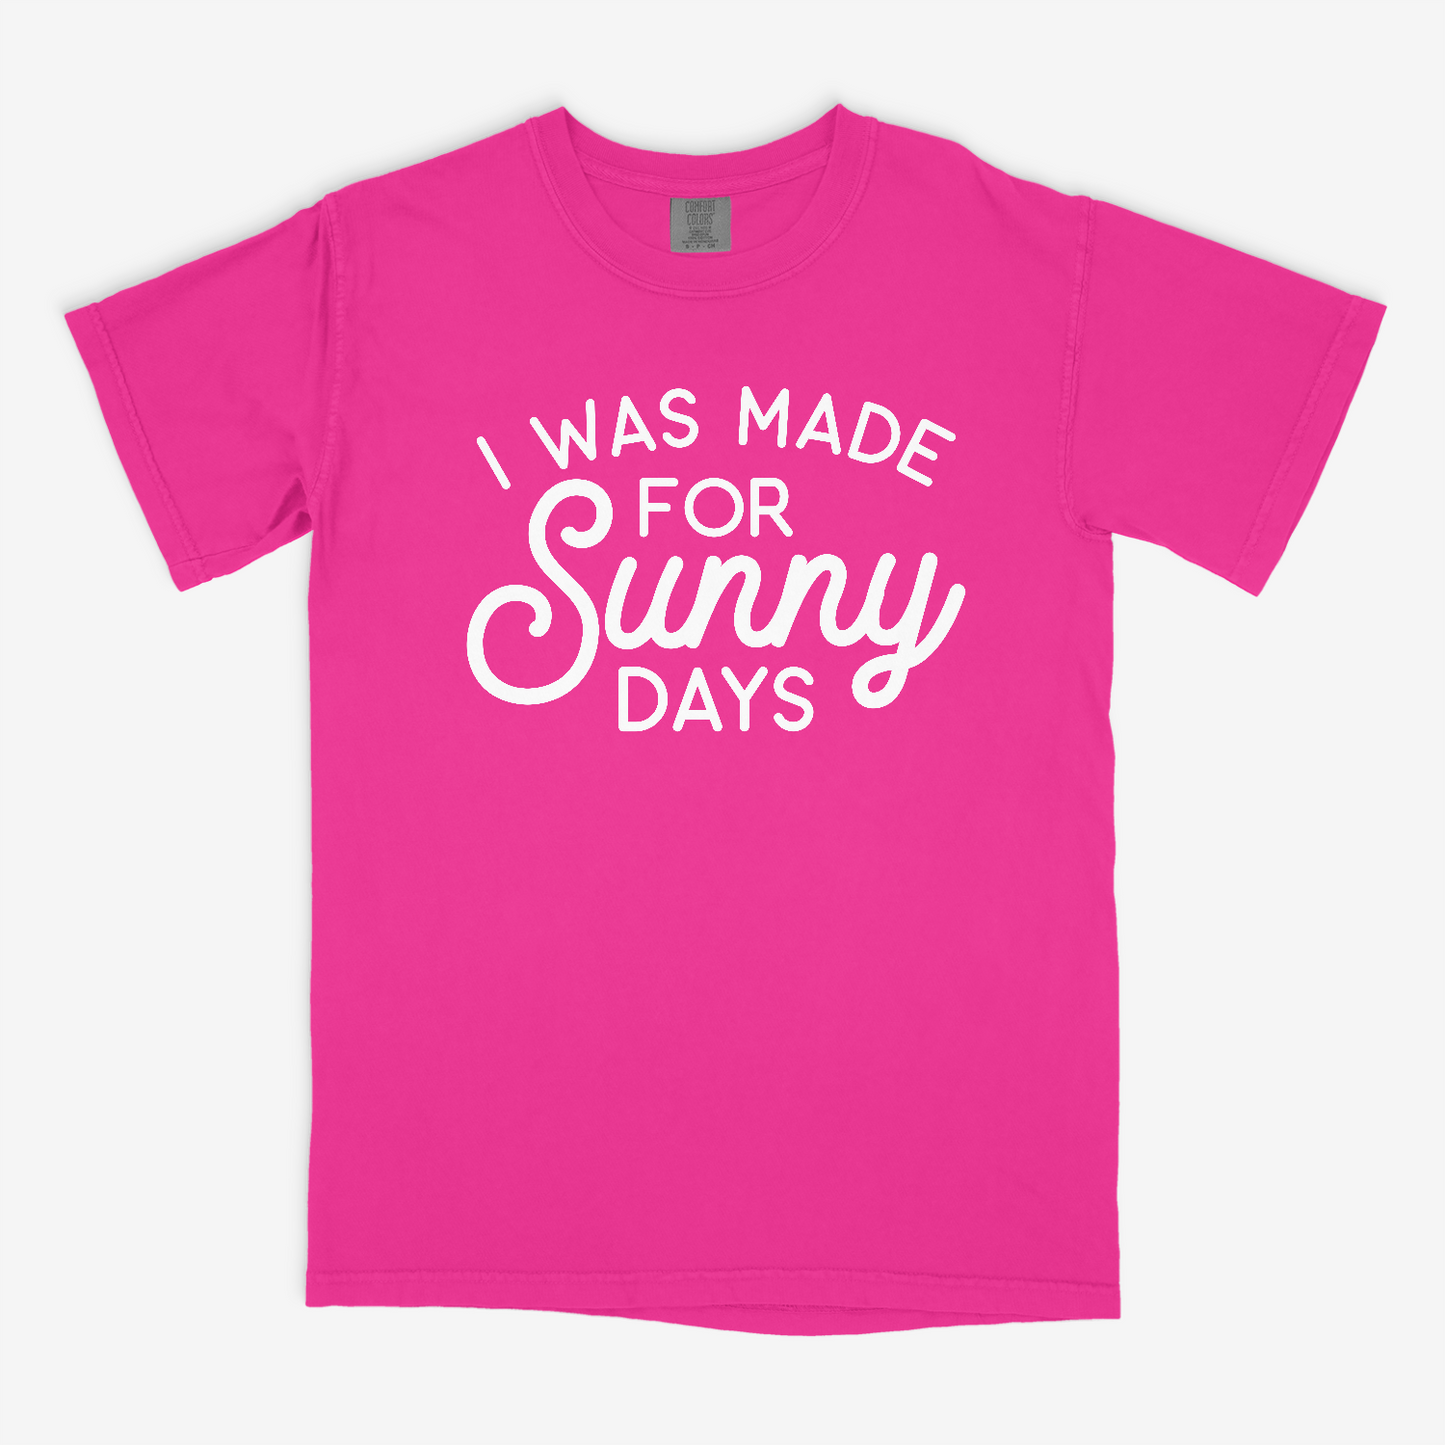 I Was Made for Sunny Days - Comfort Colors